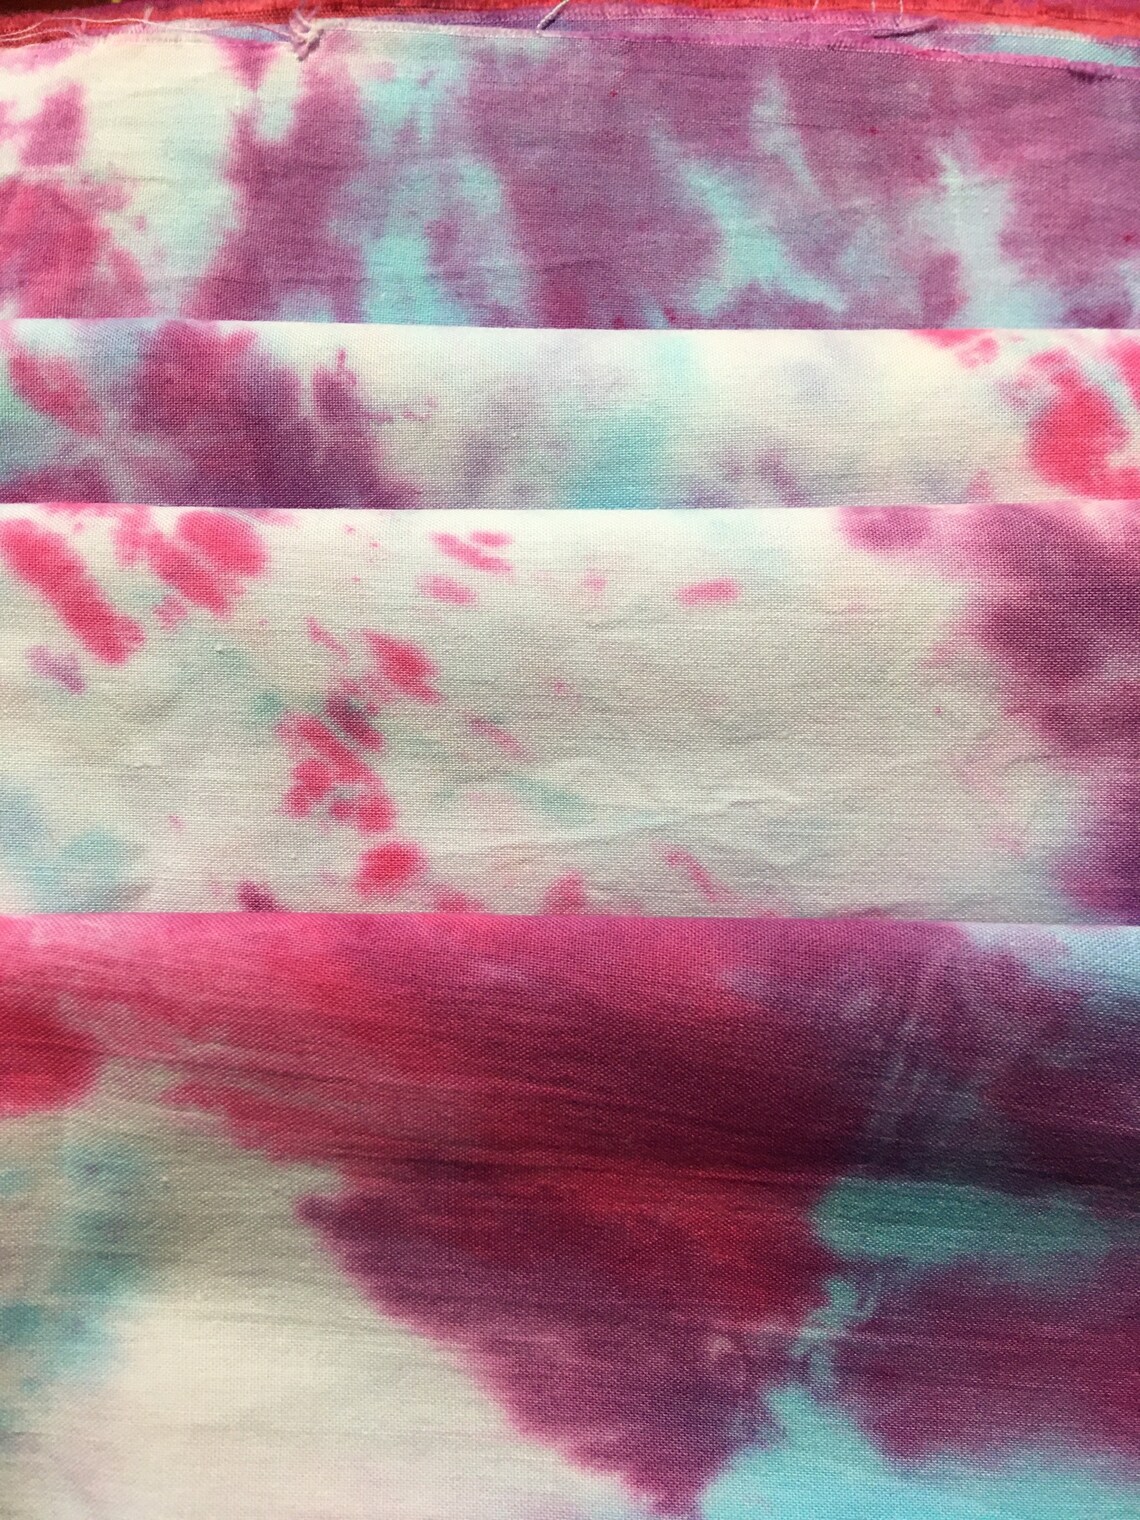 Hand Dyed 100% Cotton Fabric Pink Blue Purple and White C | Etsy